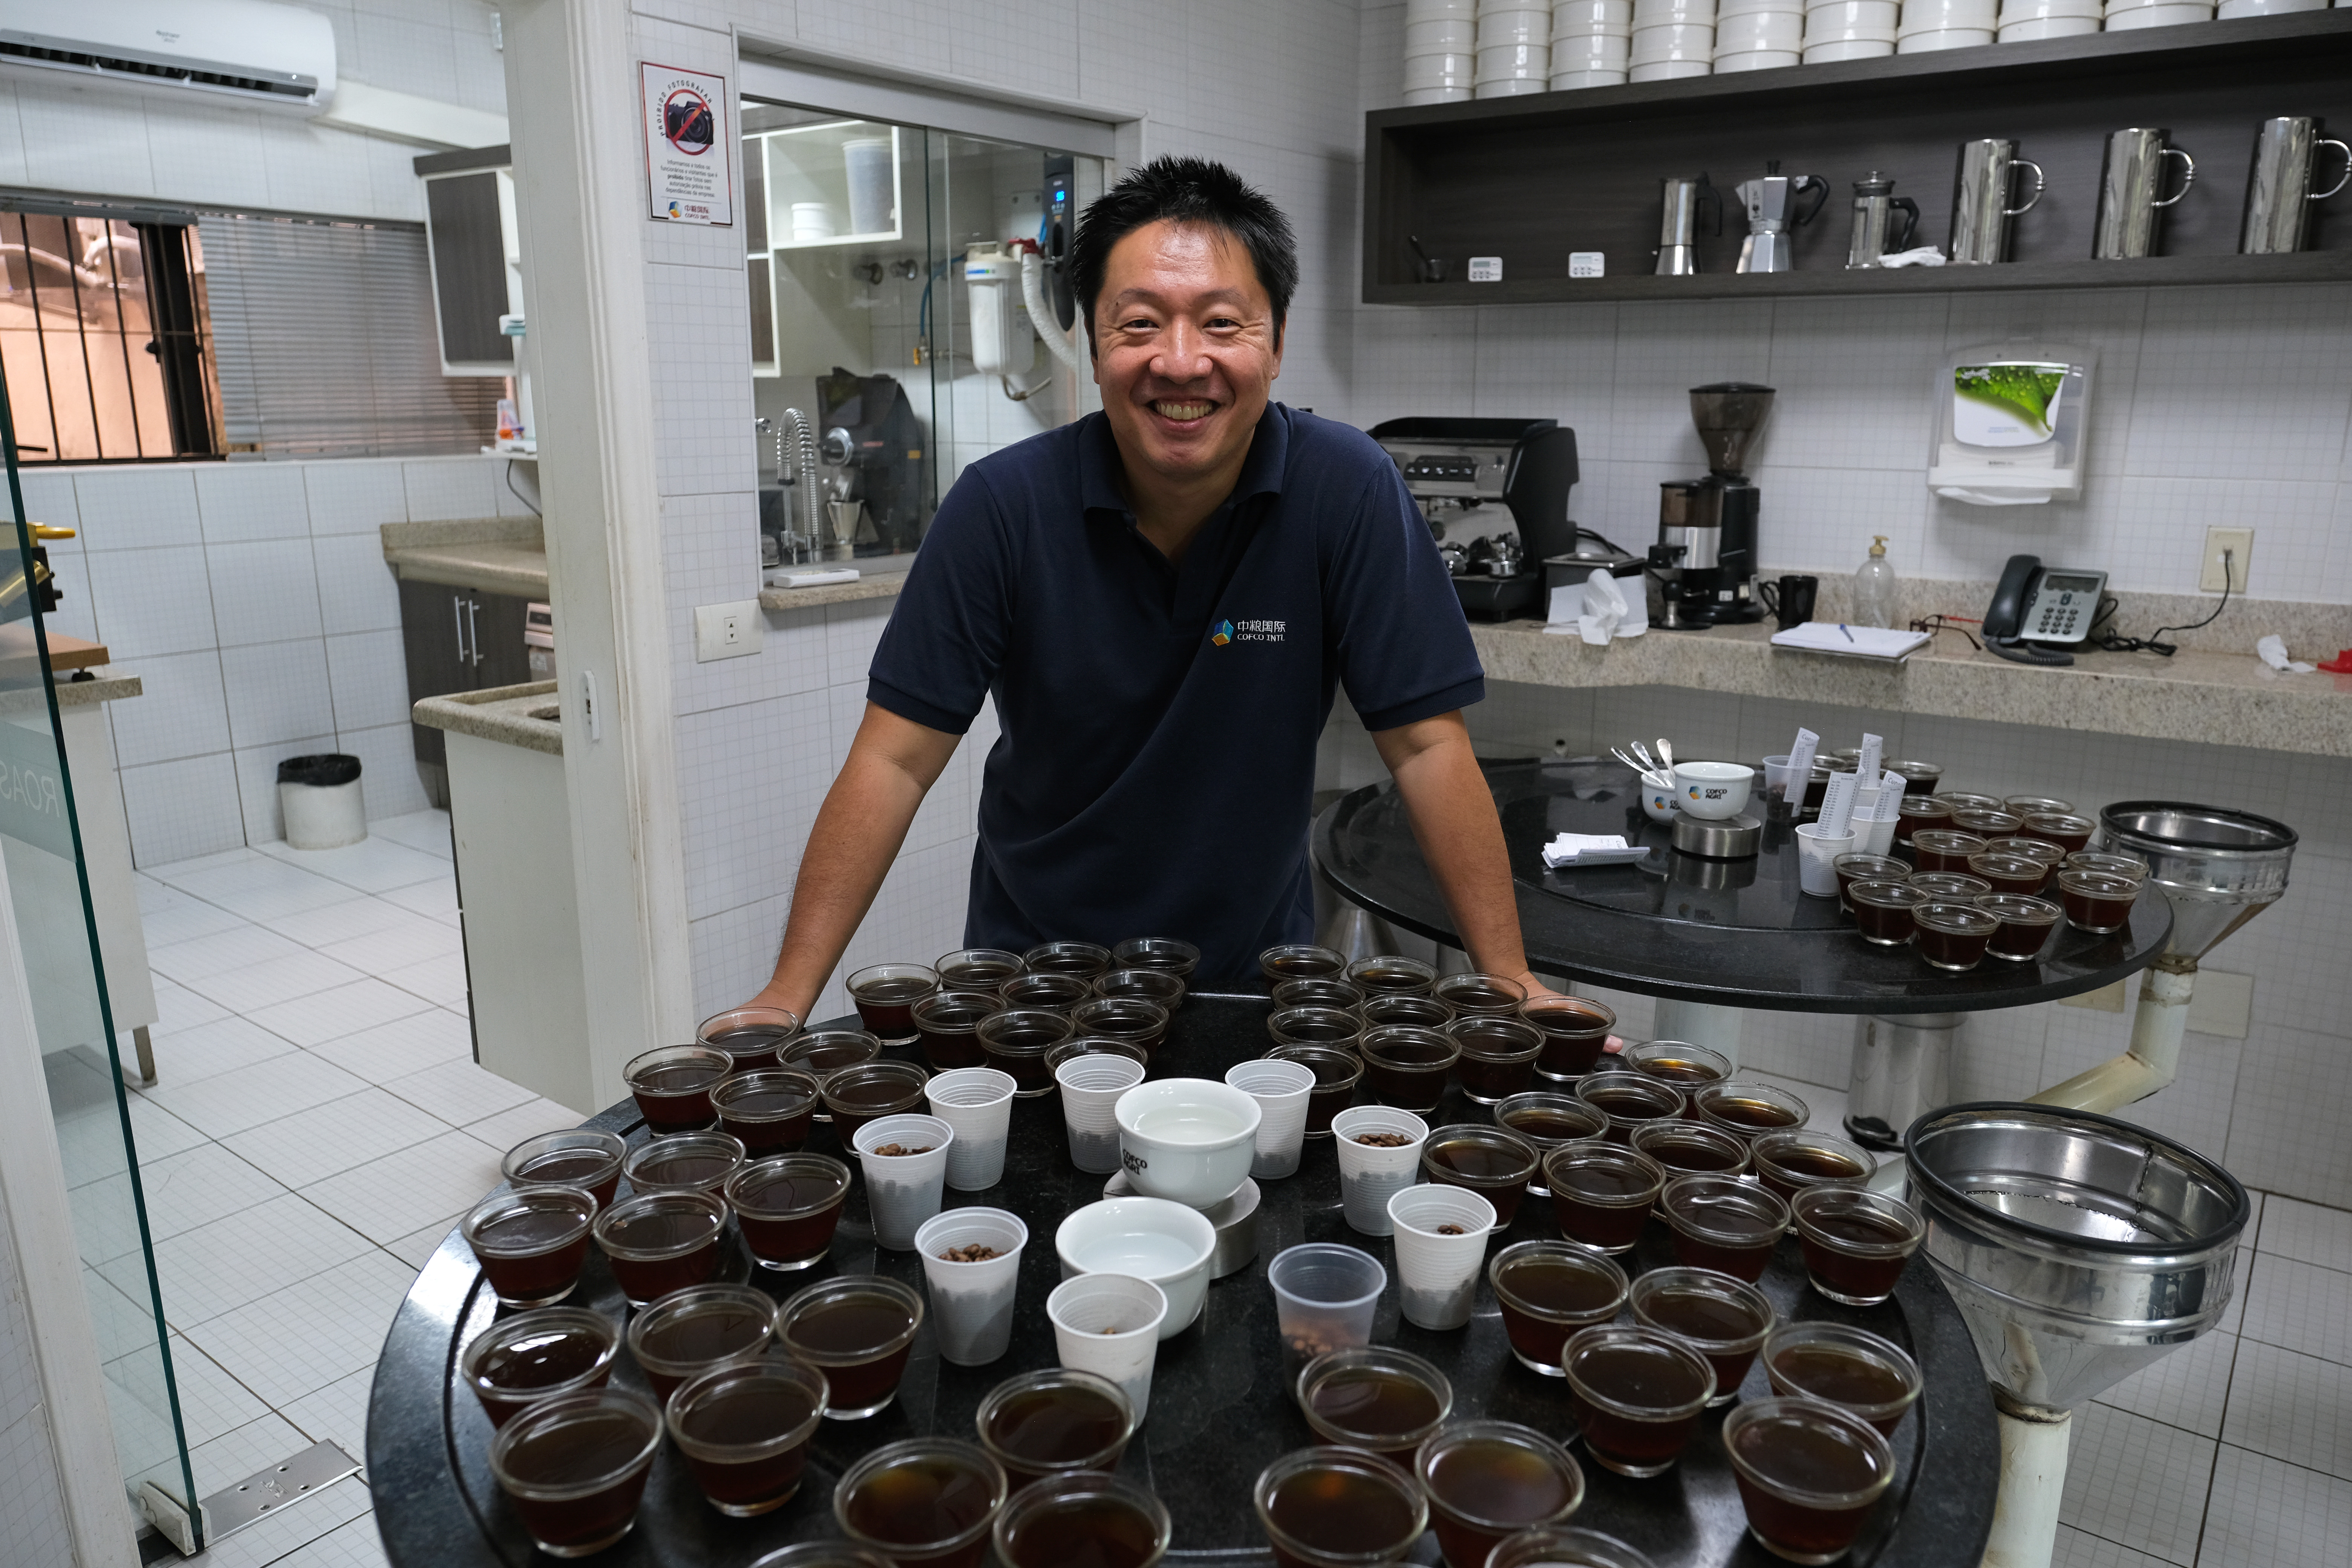 Tastings in the lab are one of the best parts of the for Chen. Here, the team assess the coffee in terms of colour of roasted beans, its growth and size.